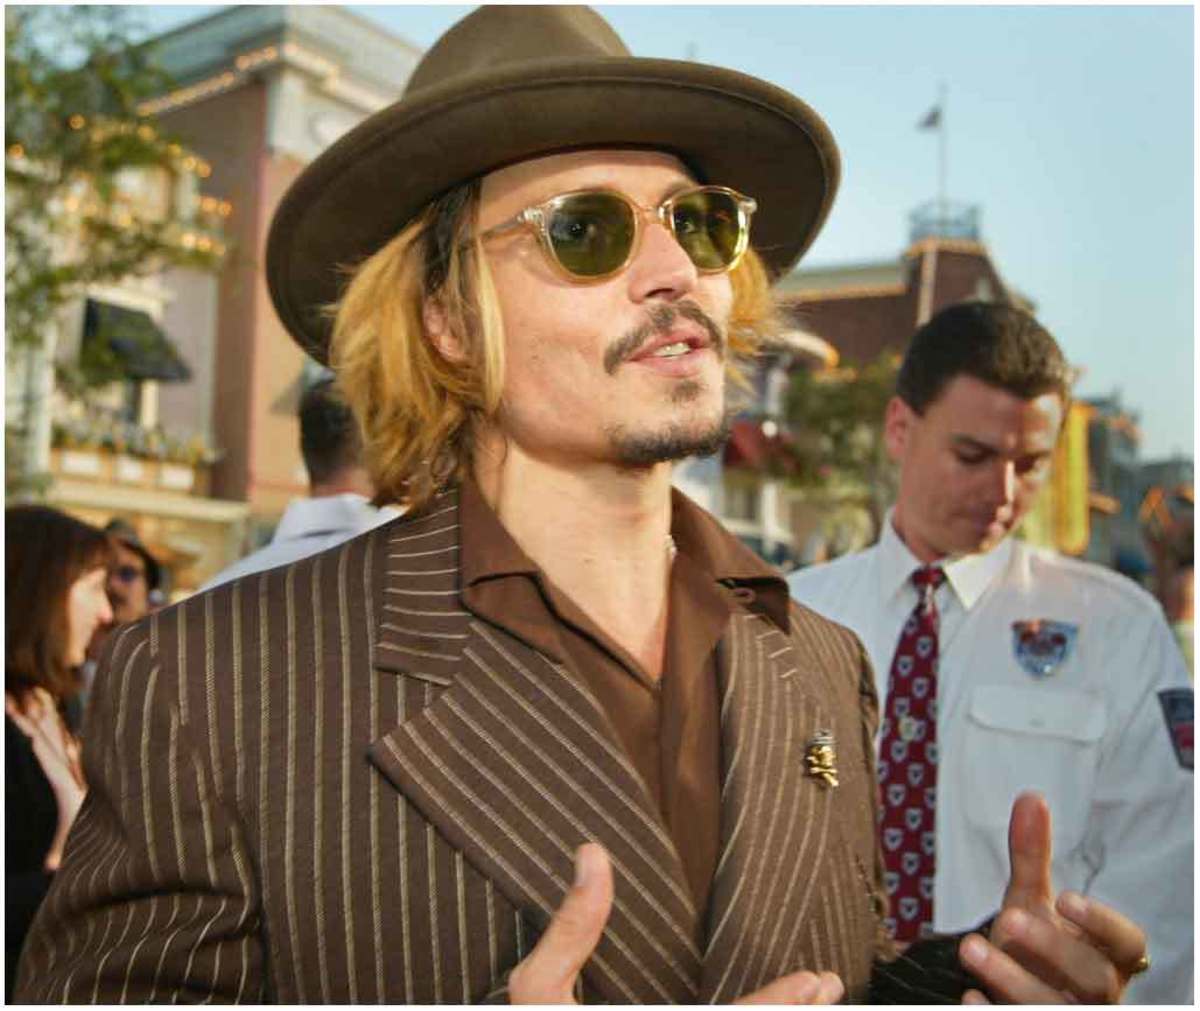 Johnny Depp is immensely wealthy, famous, talented, and successful.